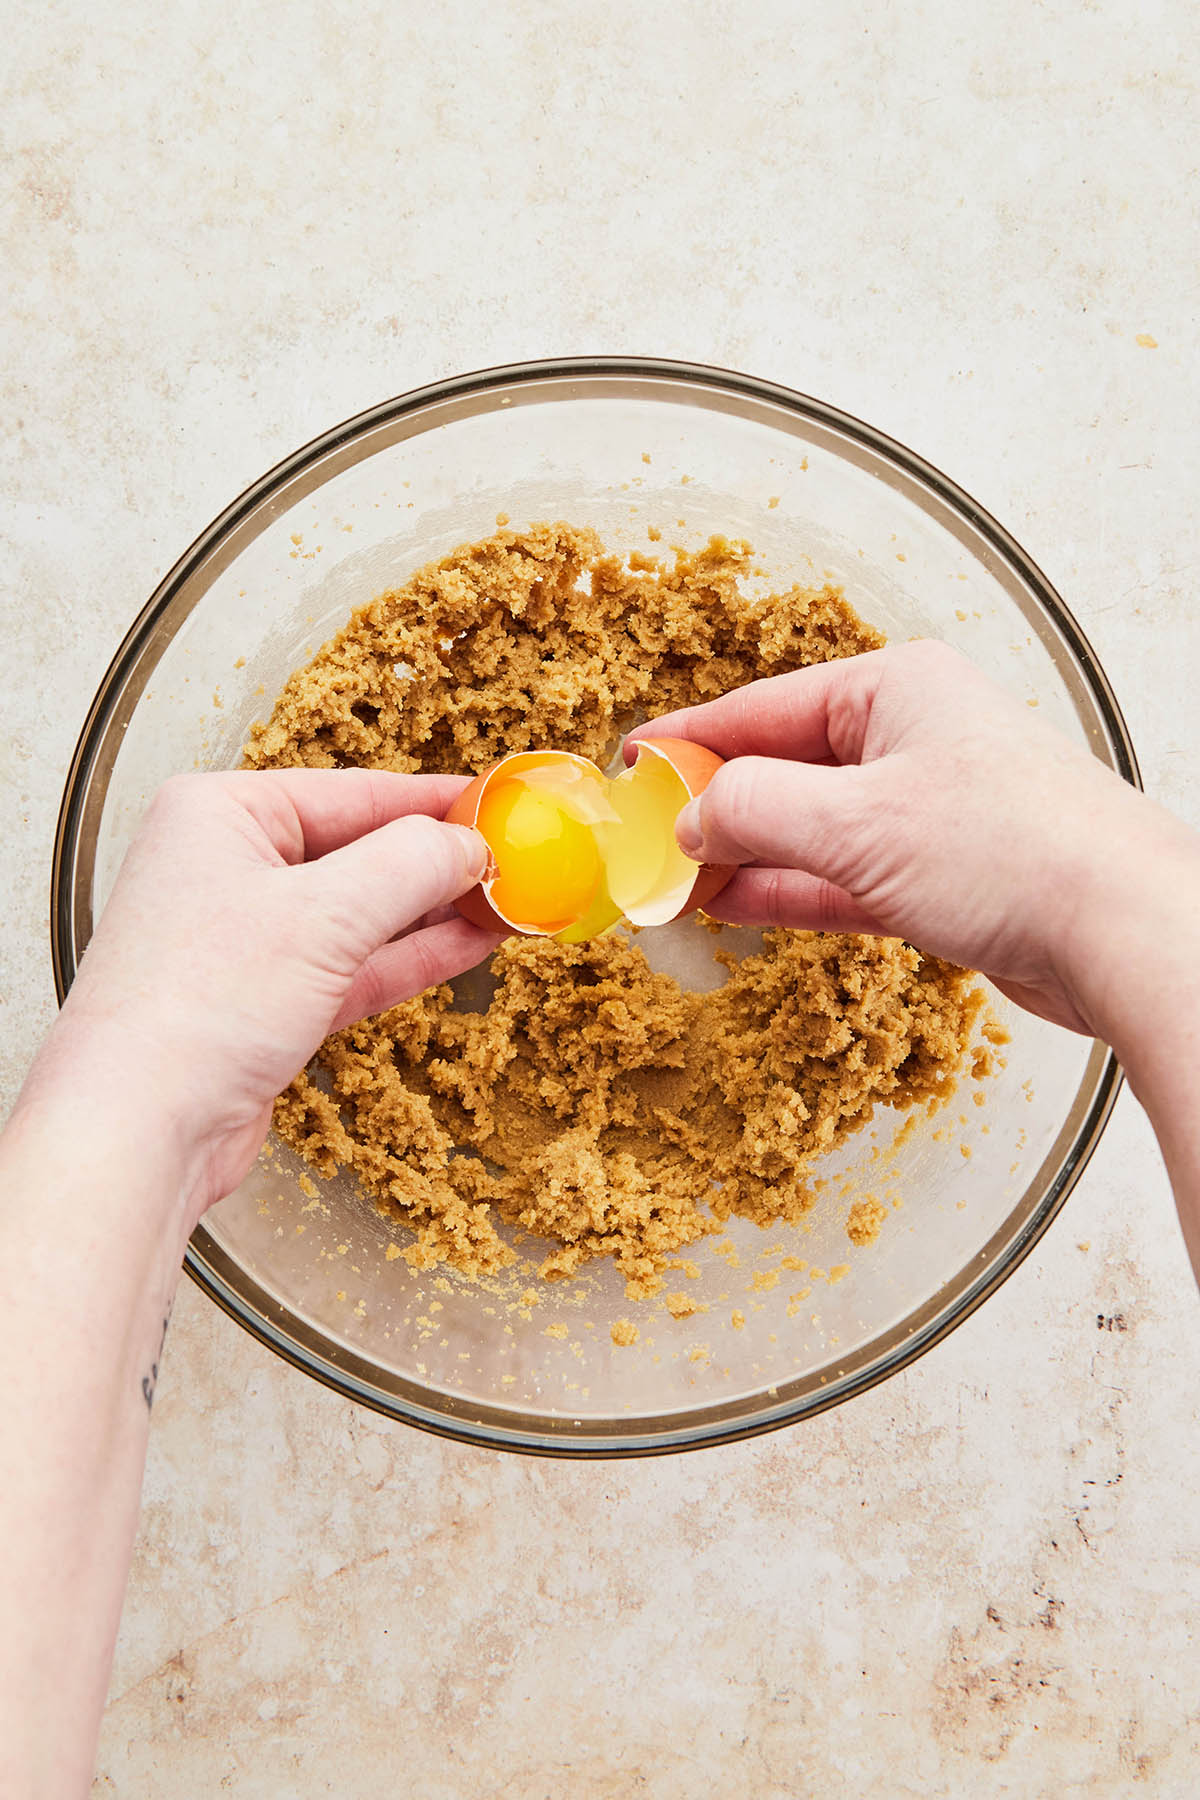 Hands cracking an egg into a bowl of mixed wet ingredients.